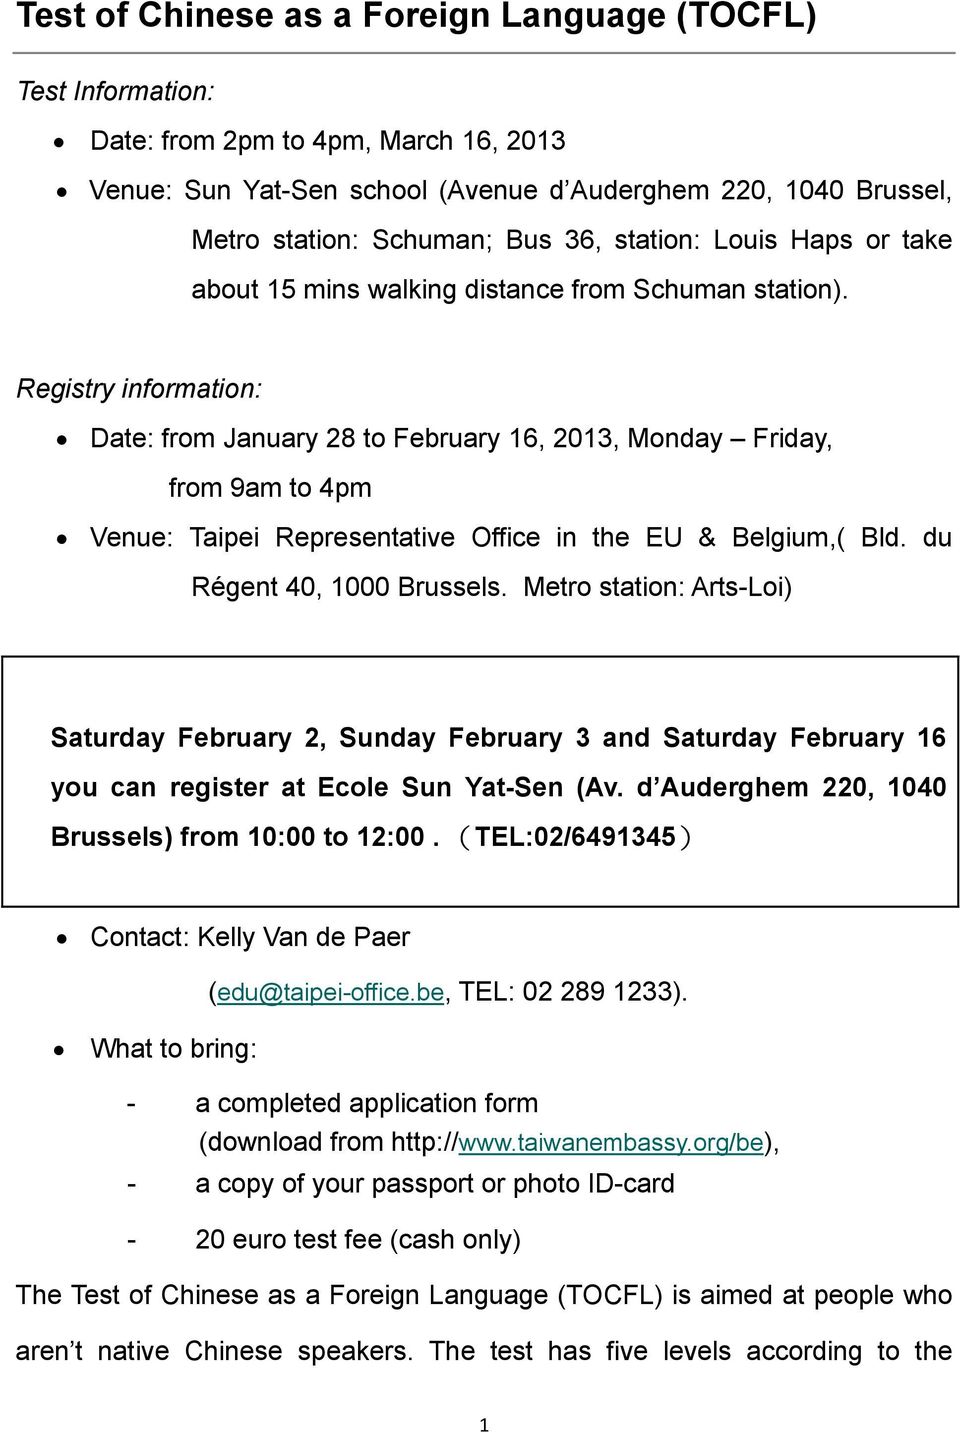 Registry information: Date: from January 28 to February 16, 2013, Monday Friday, from 9am to 4pm Venue: Taipei Representative Office in the EU & Belgium,( Bld. du Régent 40, 1000 Brussels.